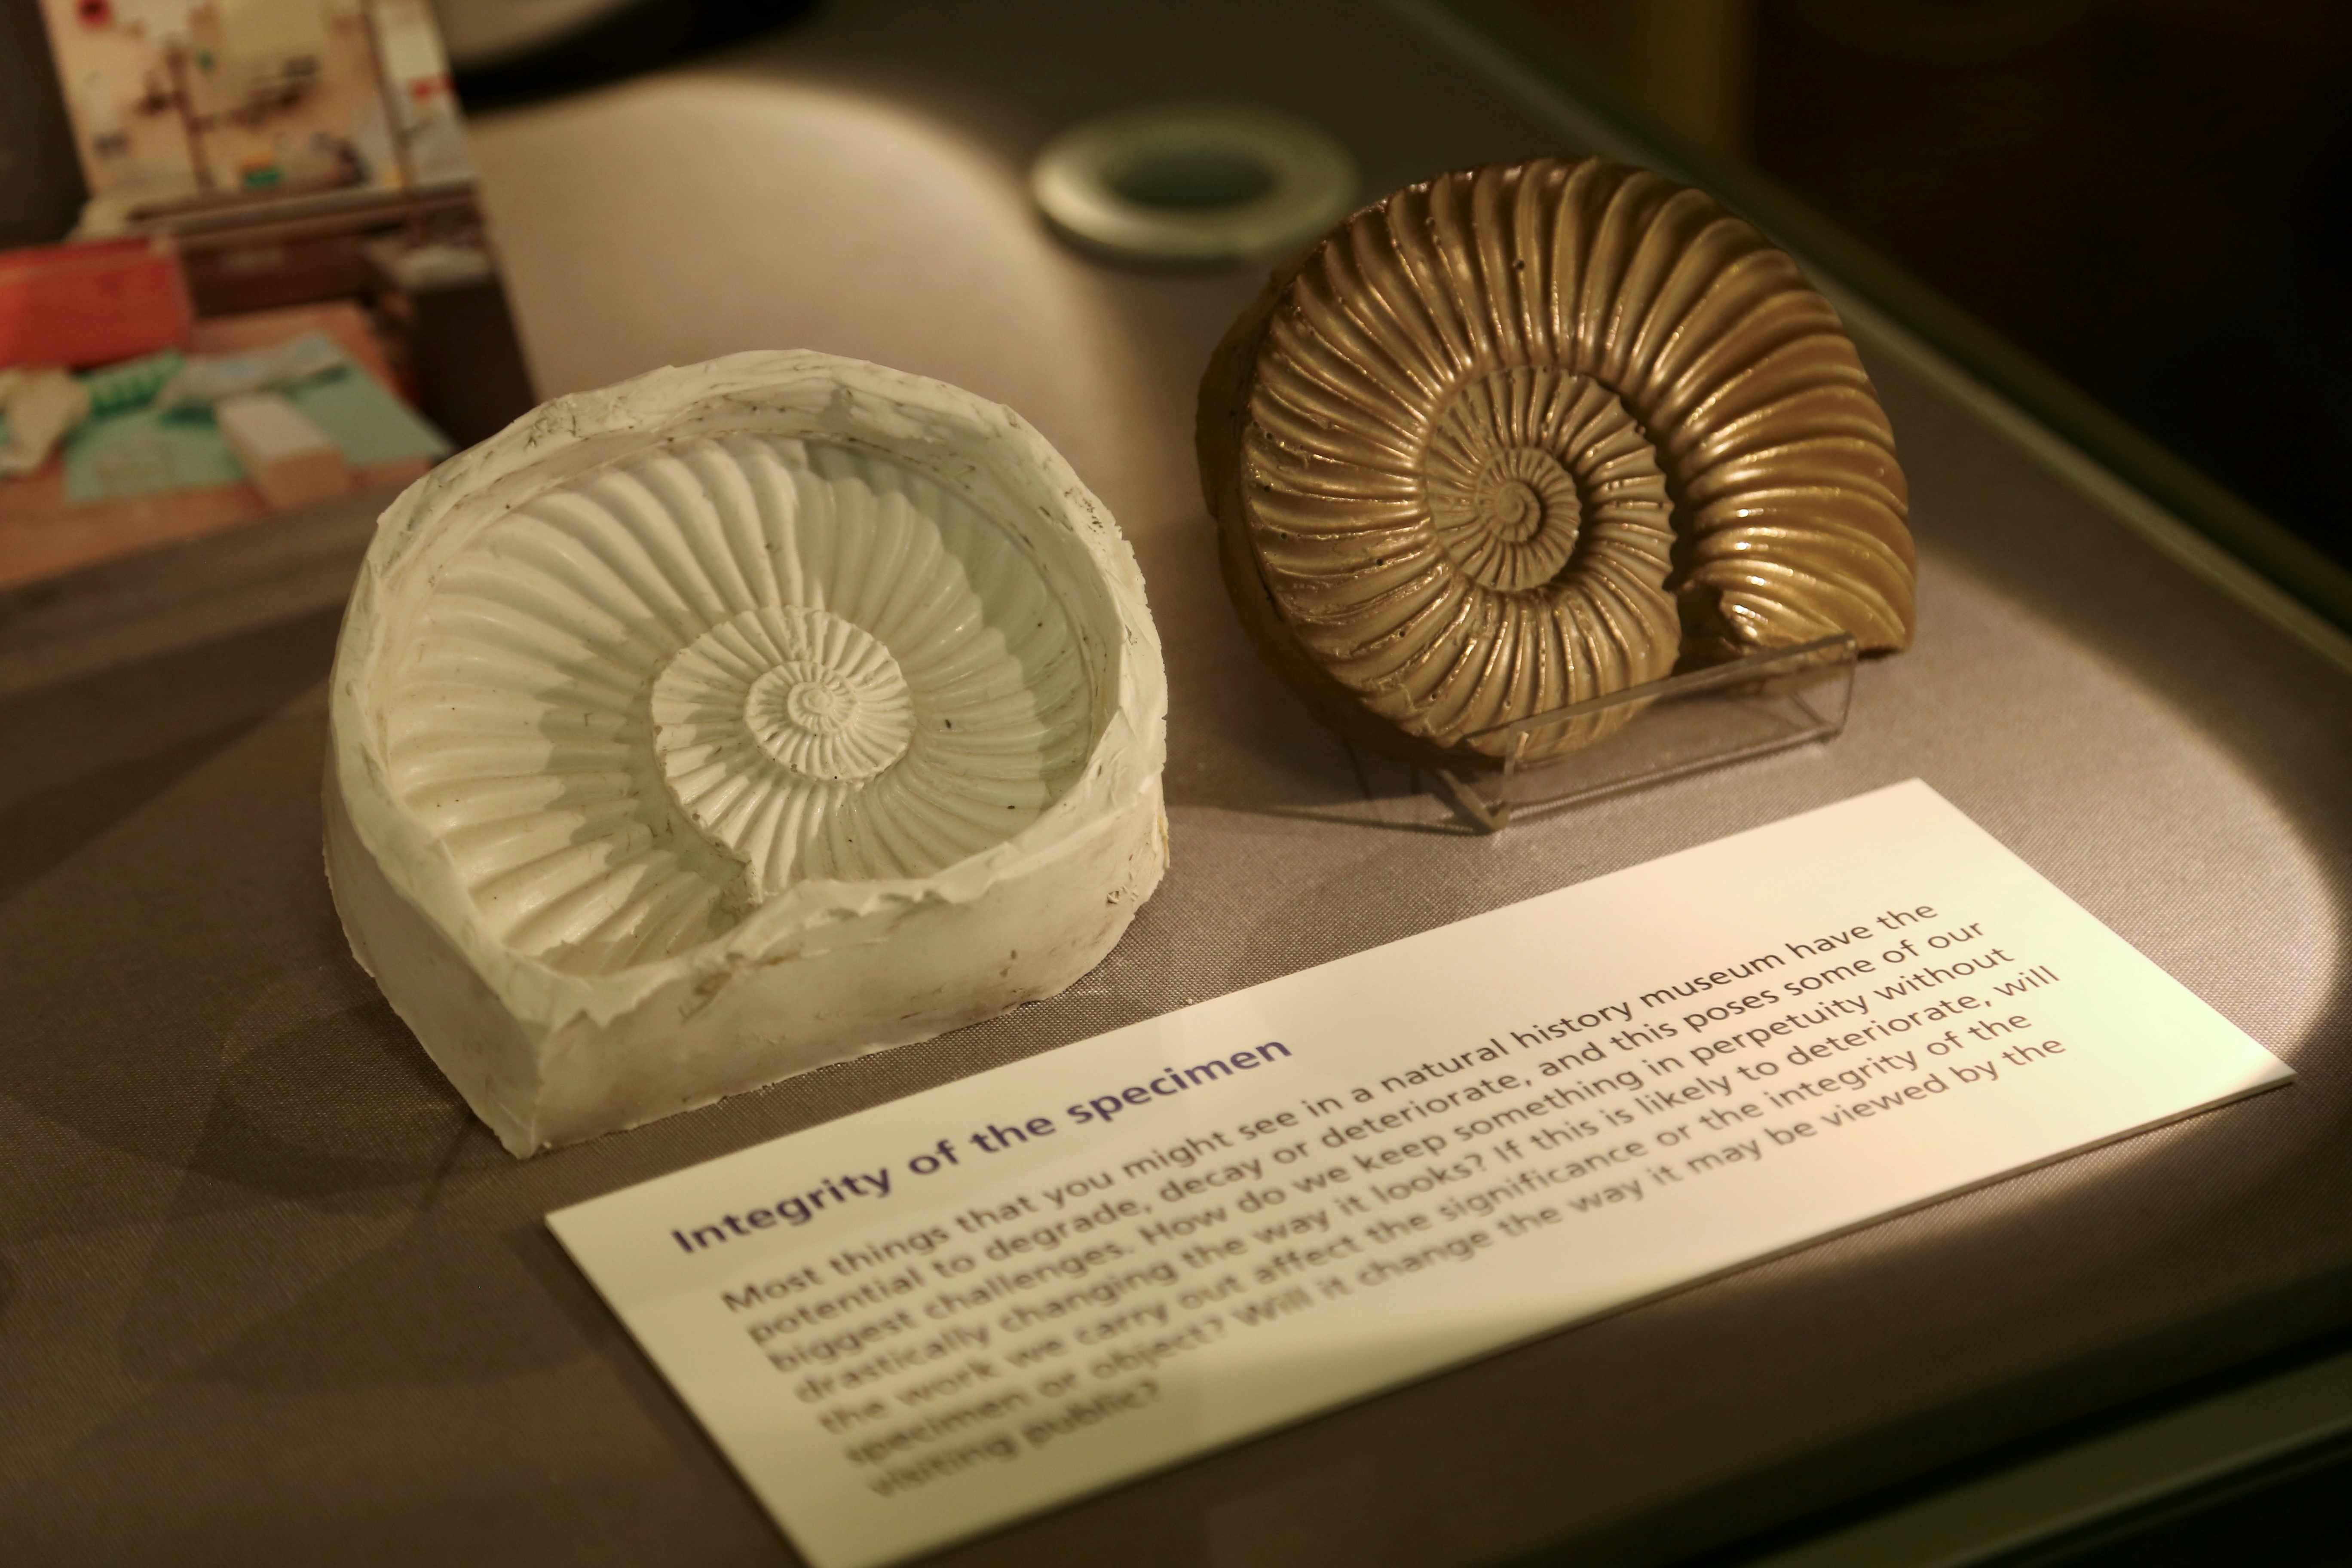 A bronze-coloured model of an ammonite, and its casting mould, made by our Earth collections conservator